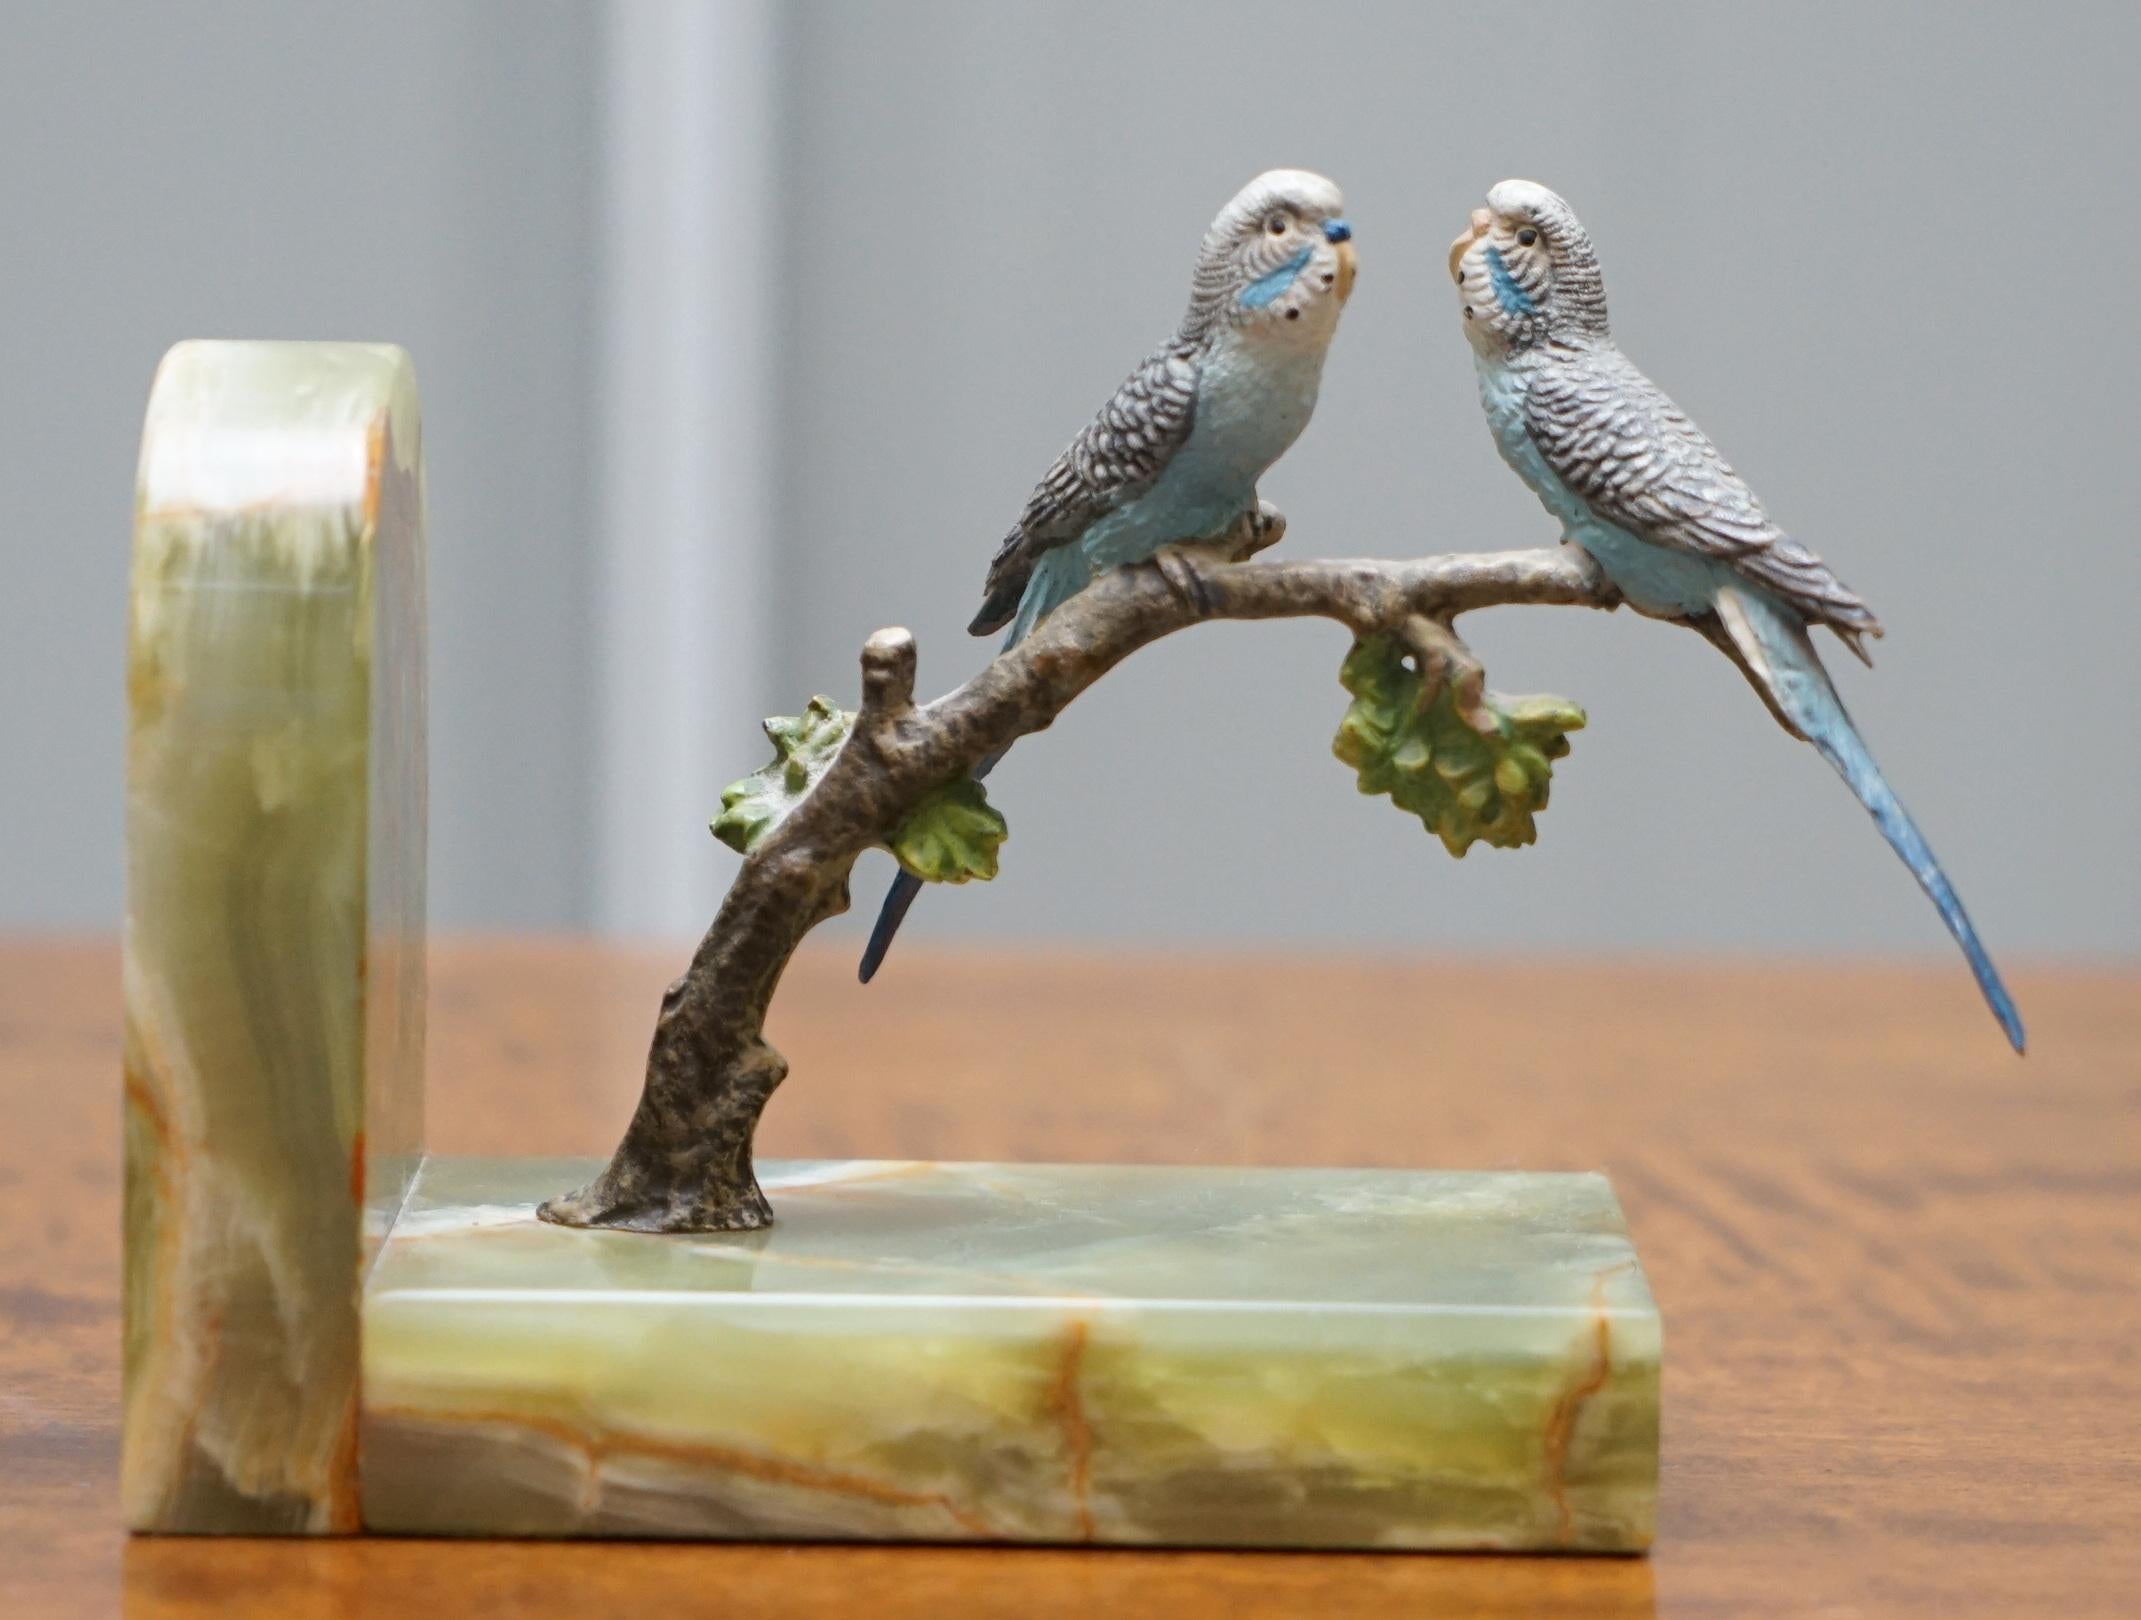 We are delighted to offer for sale this stunning pair of original circa 1920 Austrian Vienna cold painted bronze bookends depicting a pair of birds of paradise budgie guards on branches with onyx bases

A truly stunning and exceptionally rare